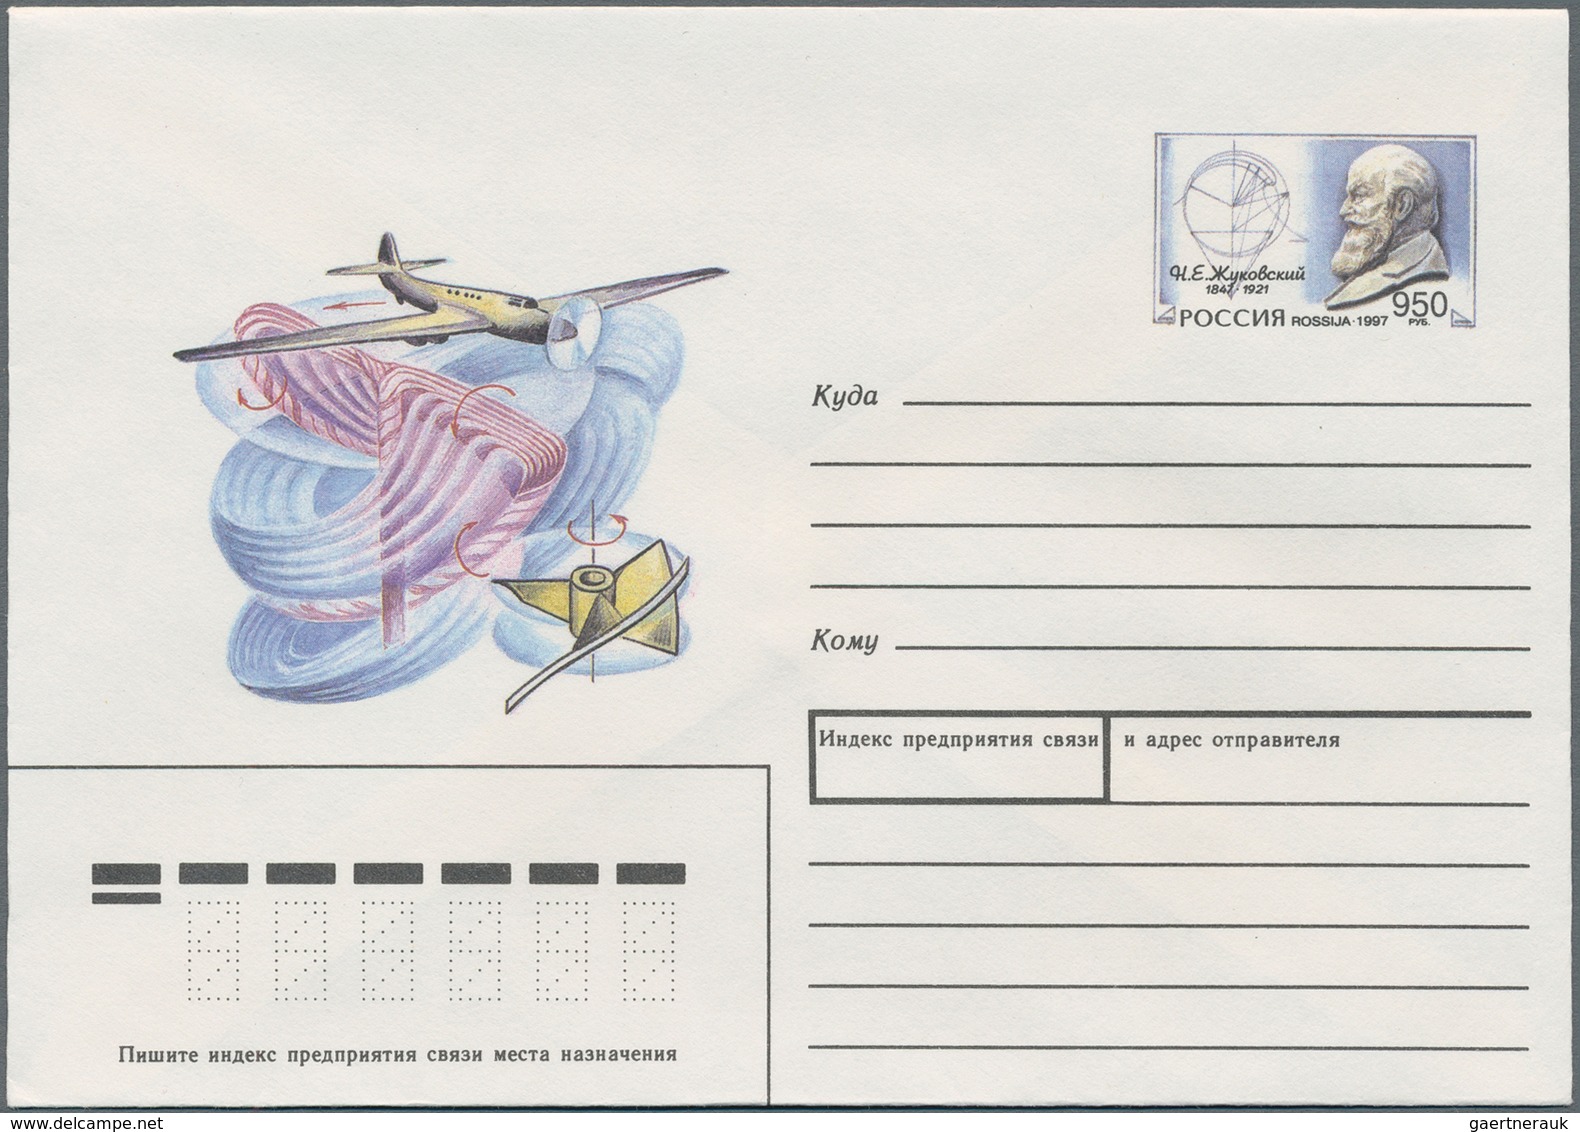 Russland - Ganzsachen: 1992/98 ca. 1.500 unused postal stationery postcards and envelopes, also with